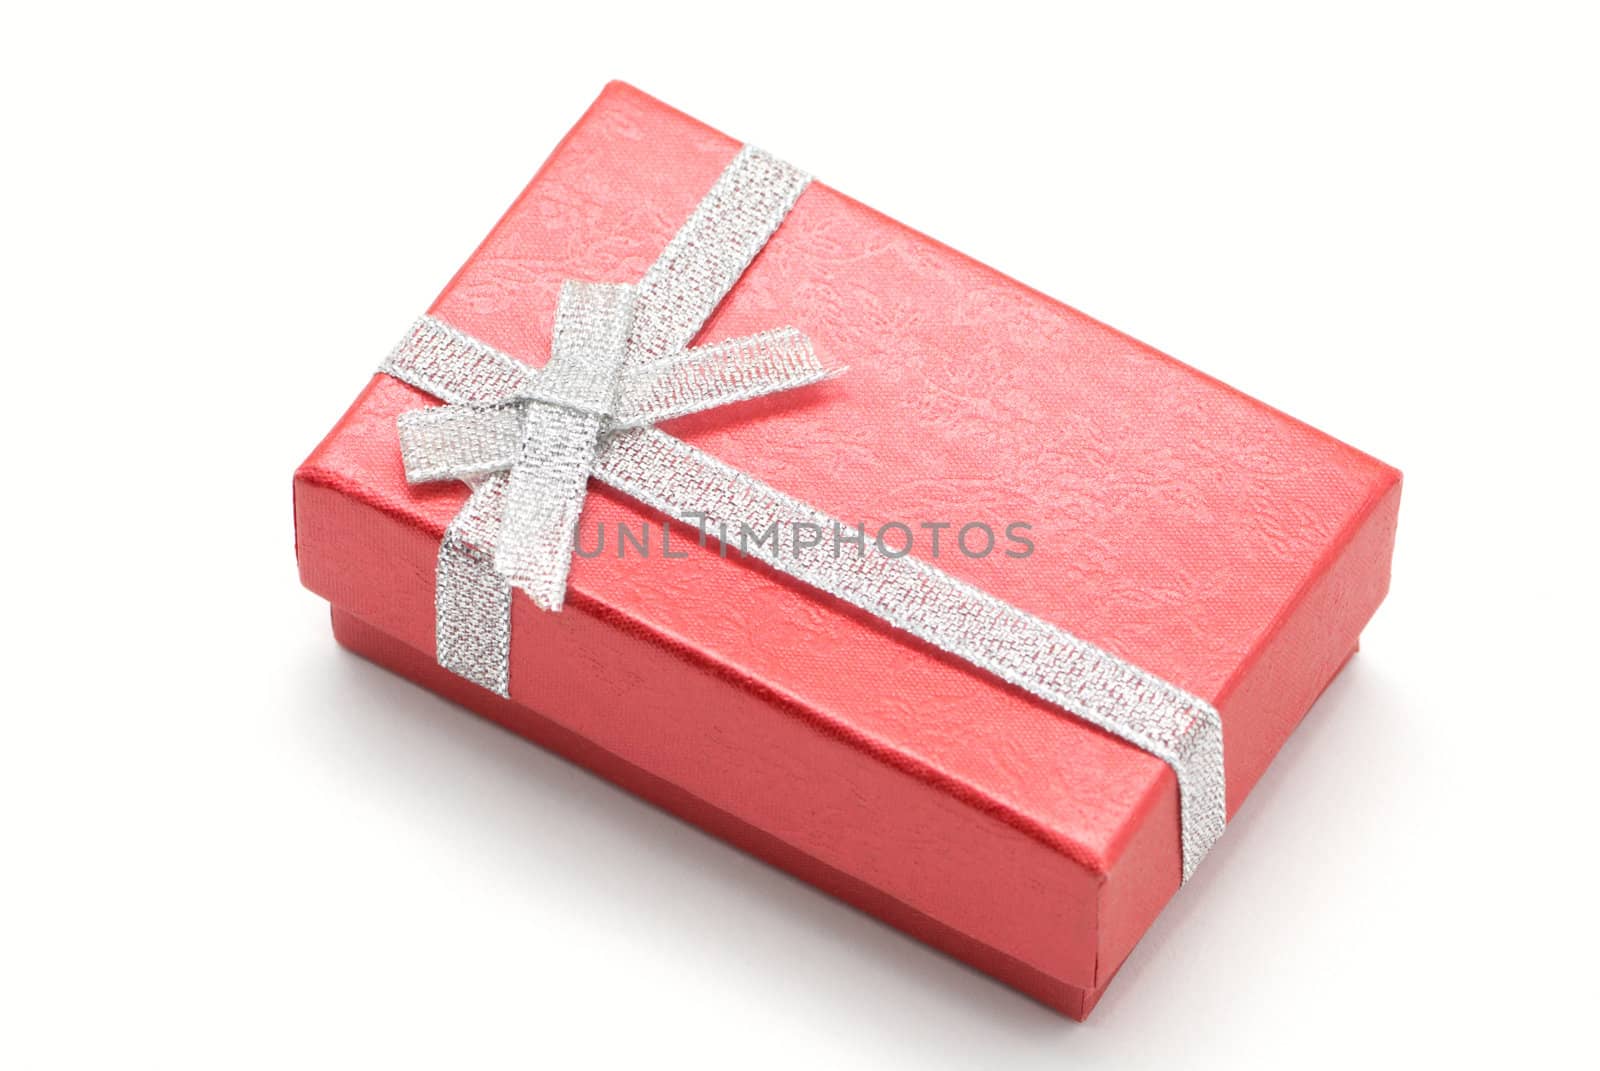 Rectegular red gift box with patterns